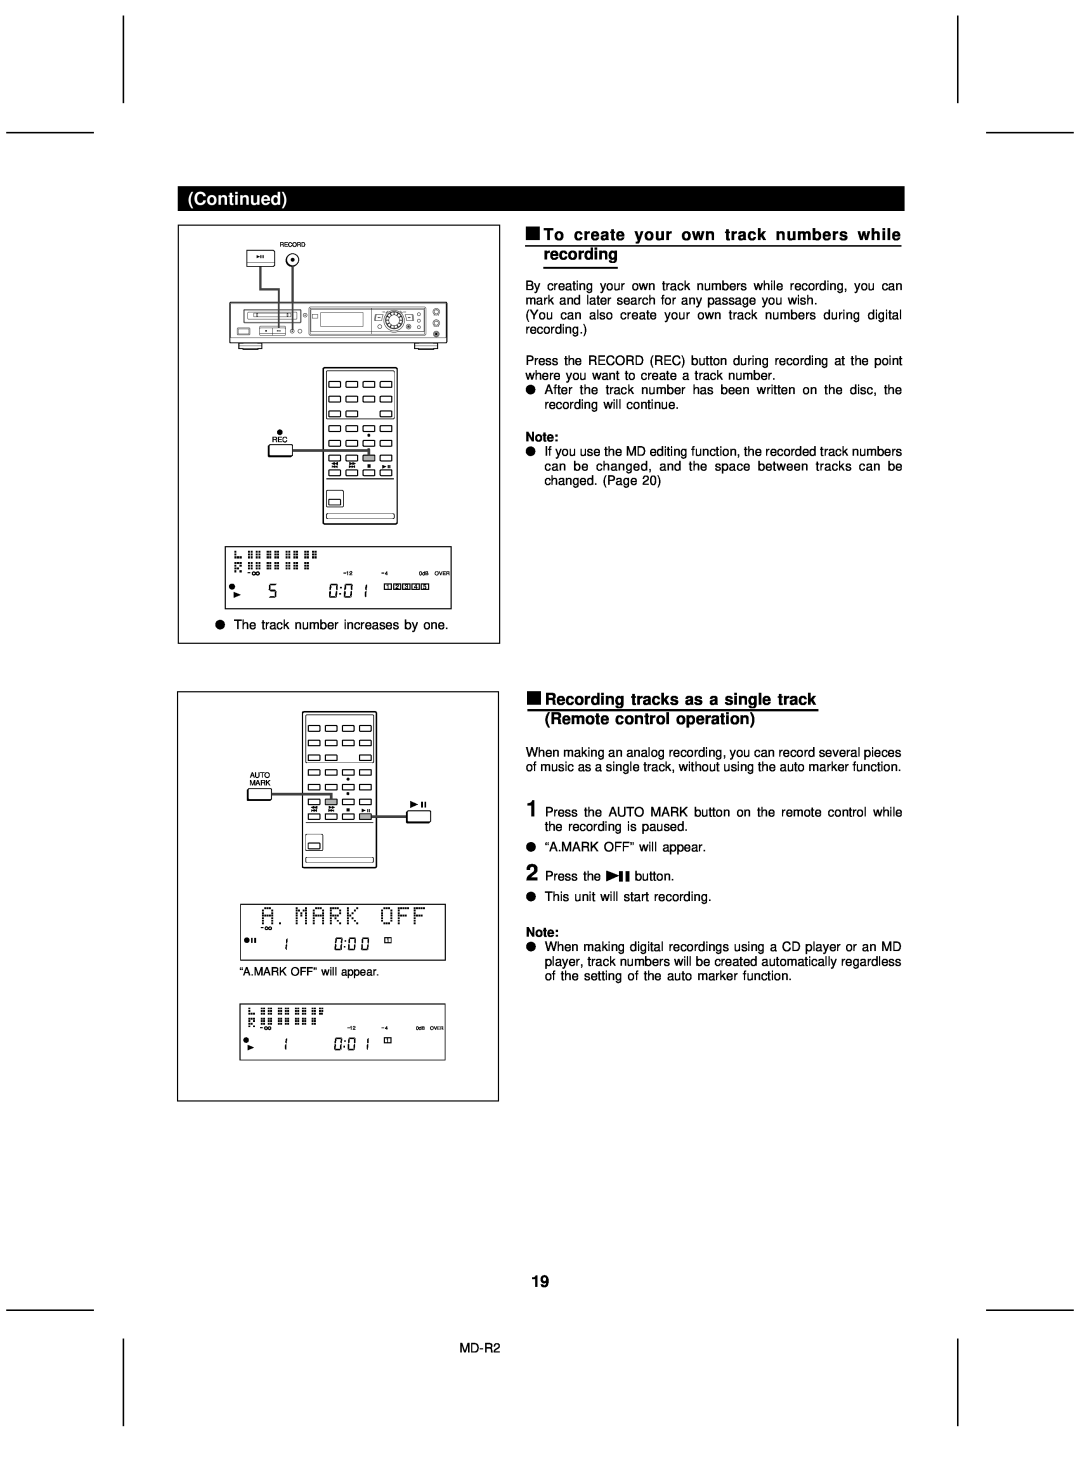 Kenwood MD-R2 operation manual To create your own track numbers whilerecording, Continued 